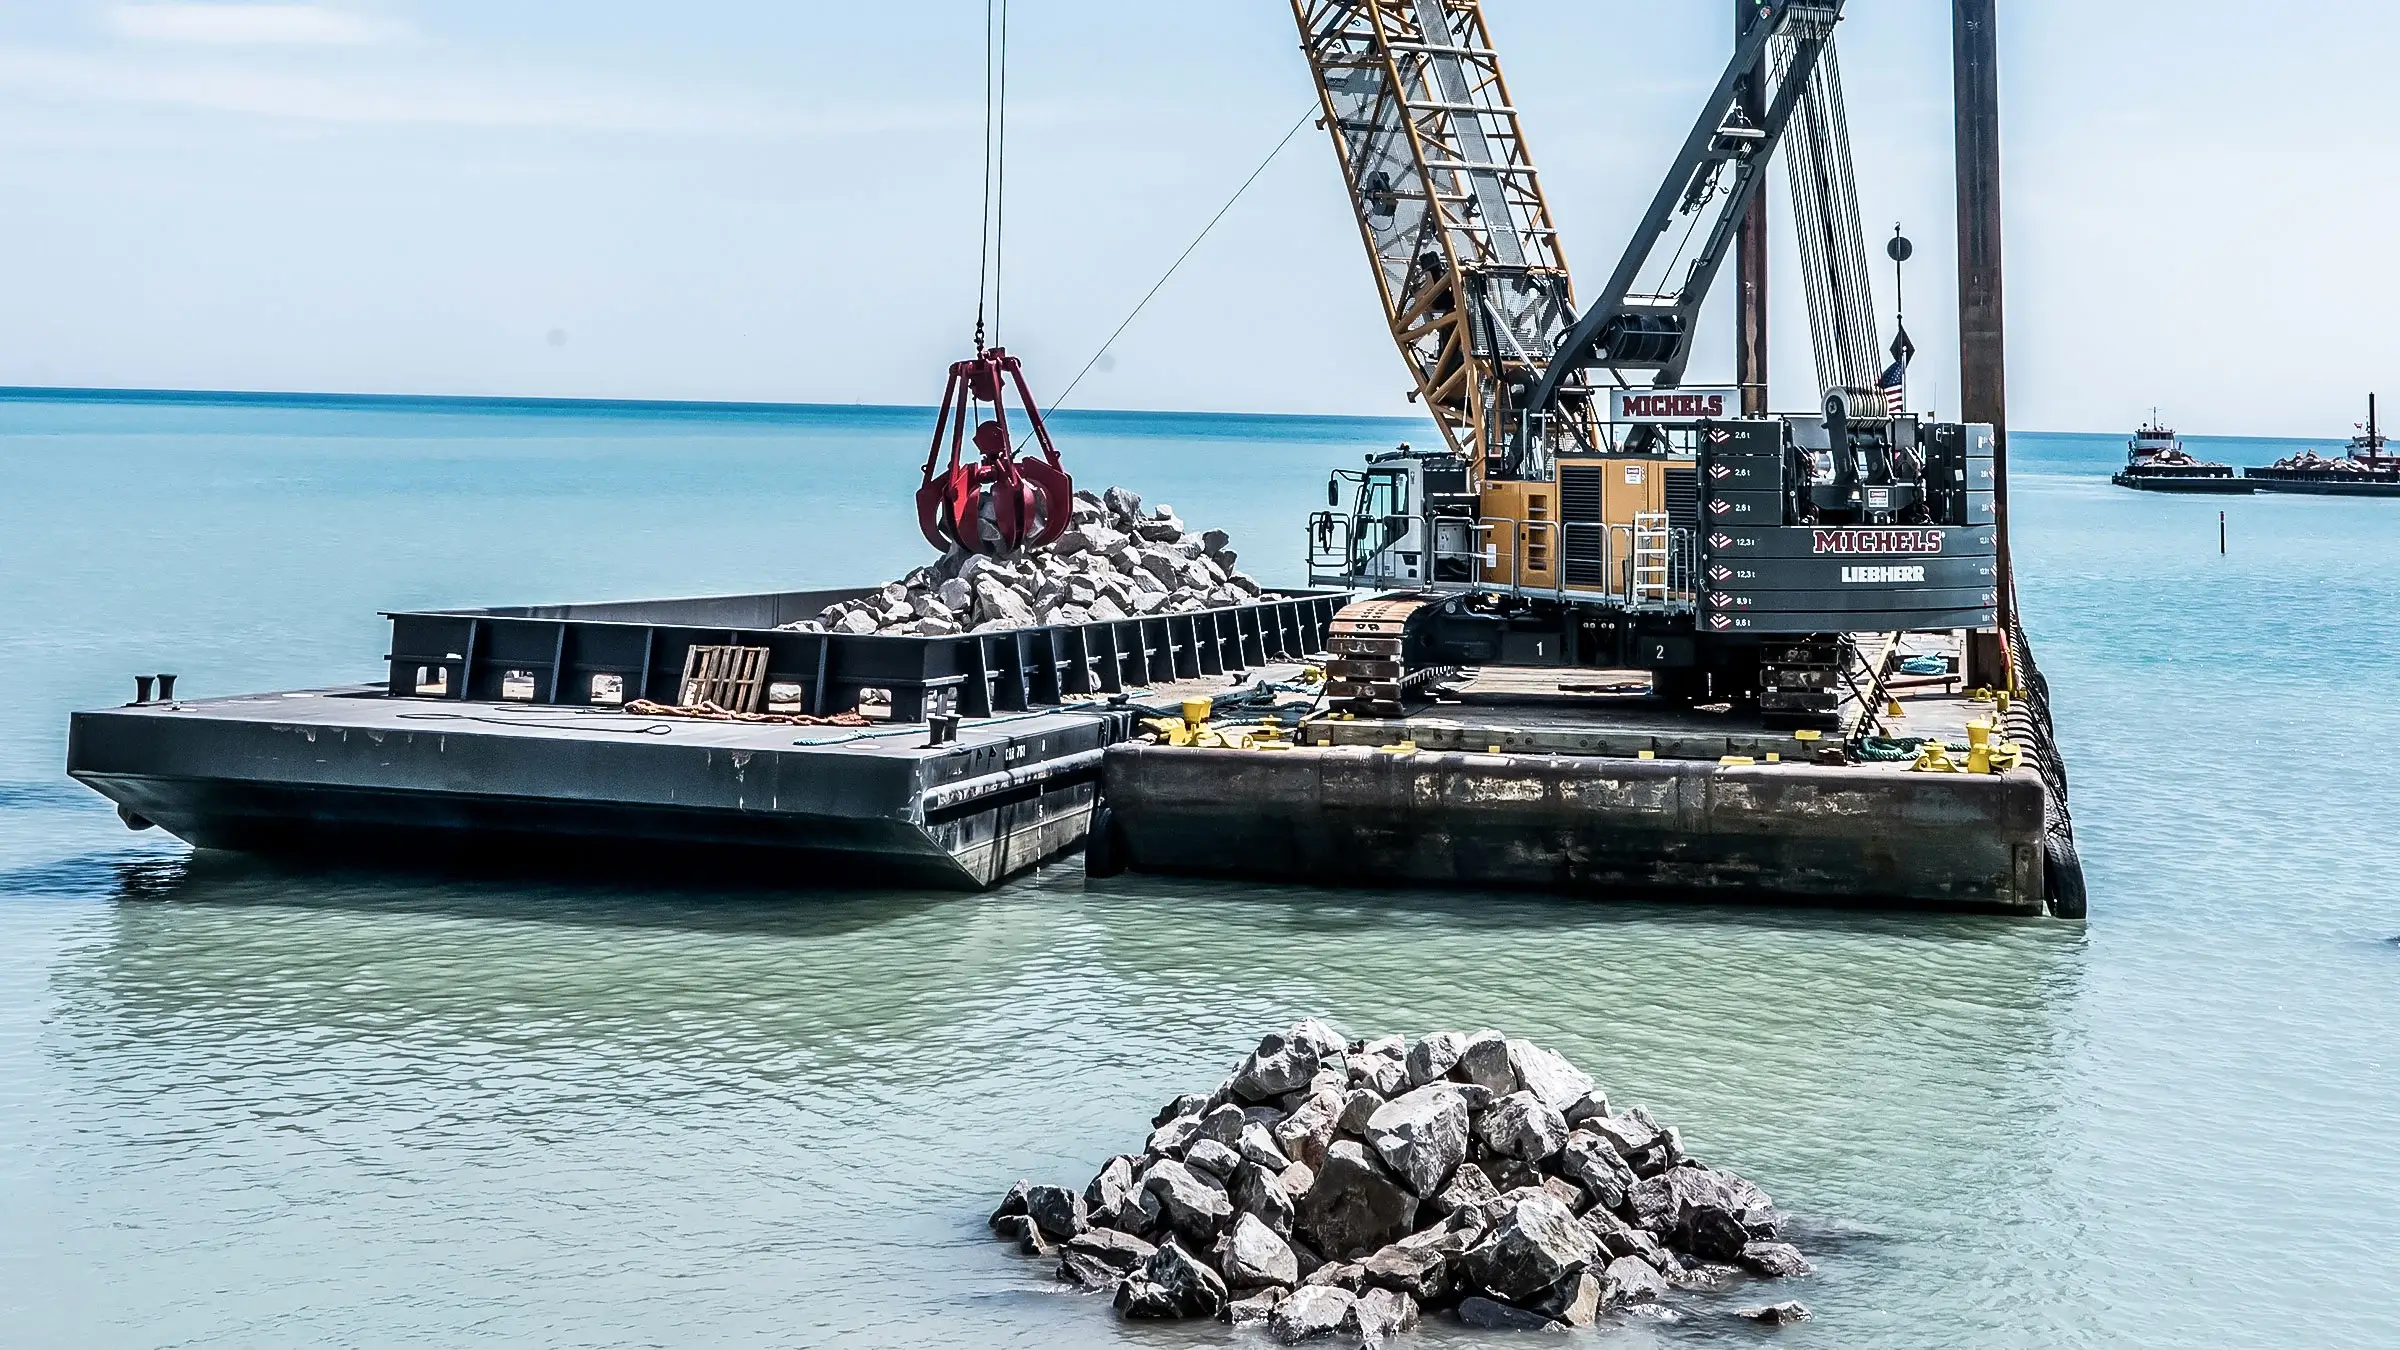 A crane lifts heavy aggregates off-shore from a barge in Lake Michigan